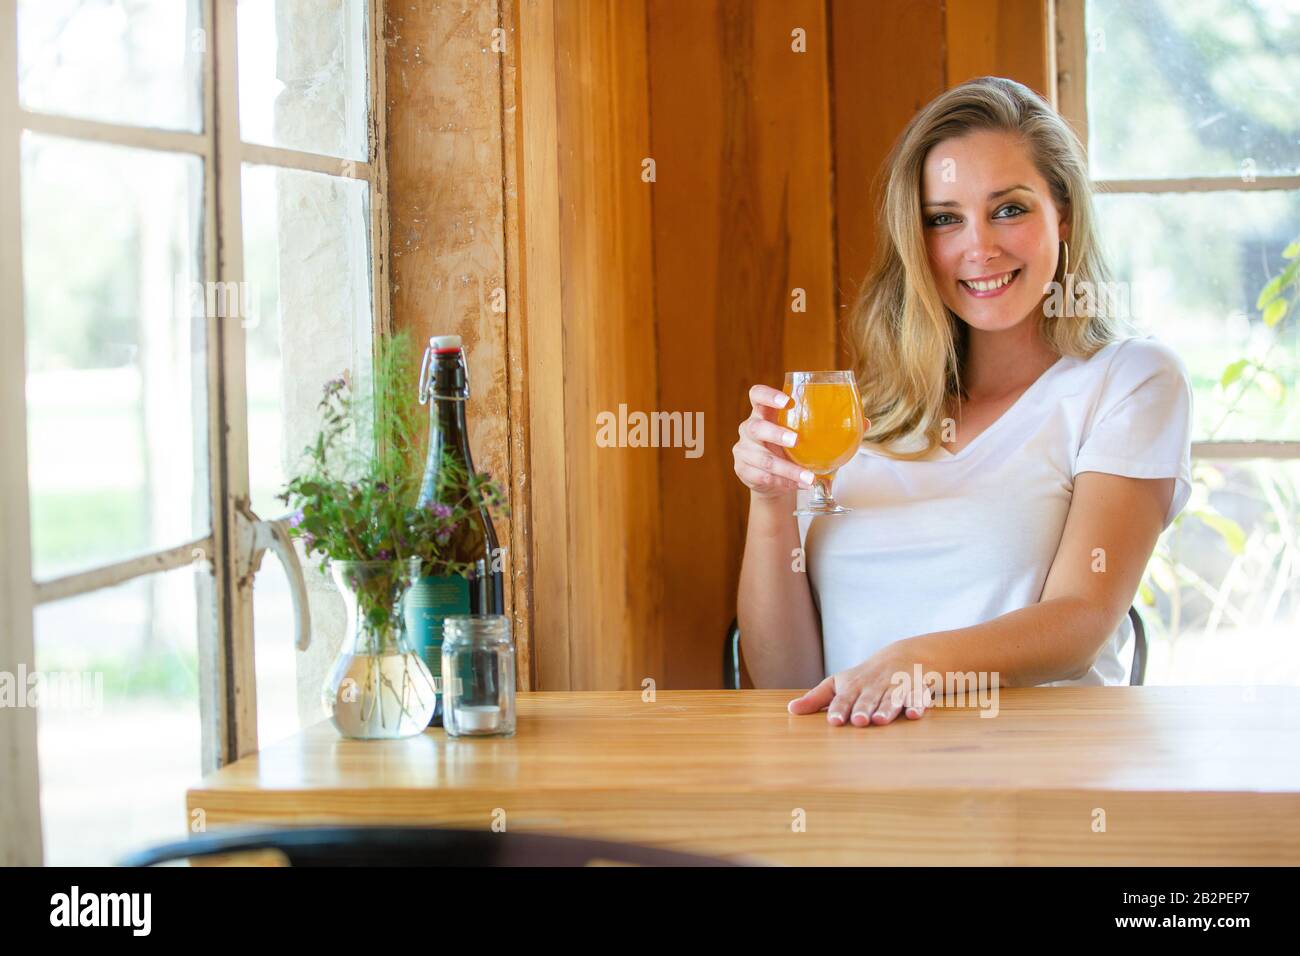 Casual lifestyle portrait of a beautiful woman lounging relaxed at local pub brewery with friends, drinking craft beer Stock Photo